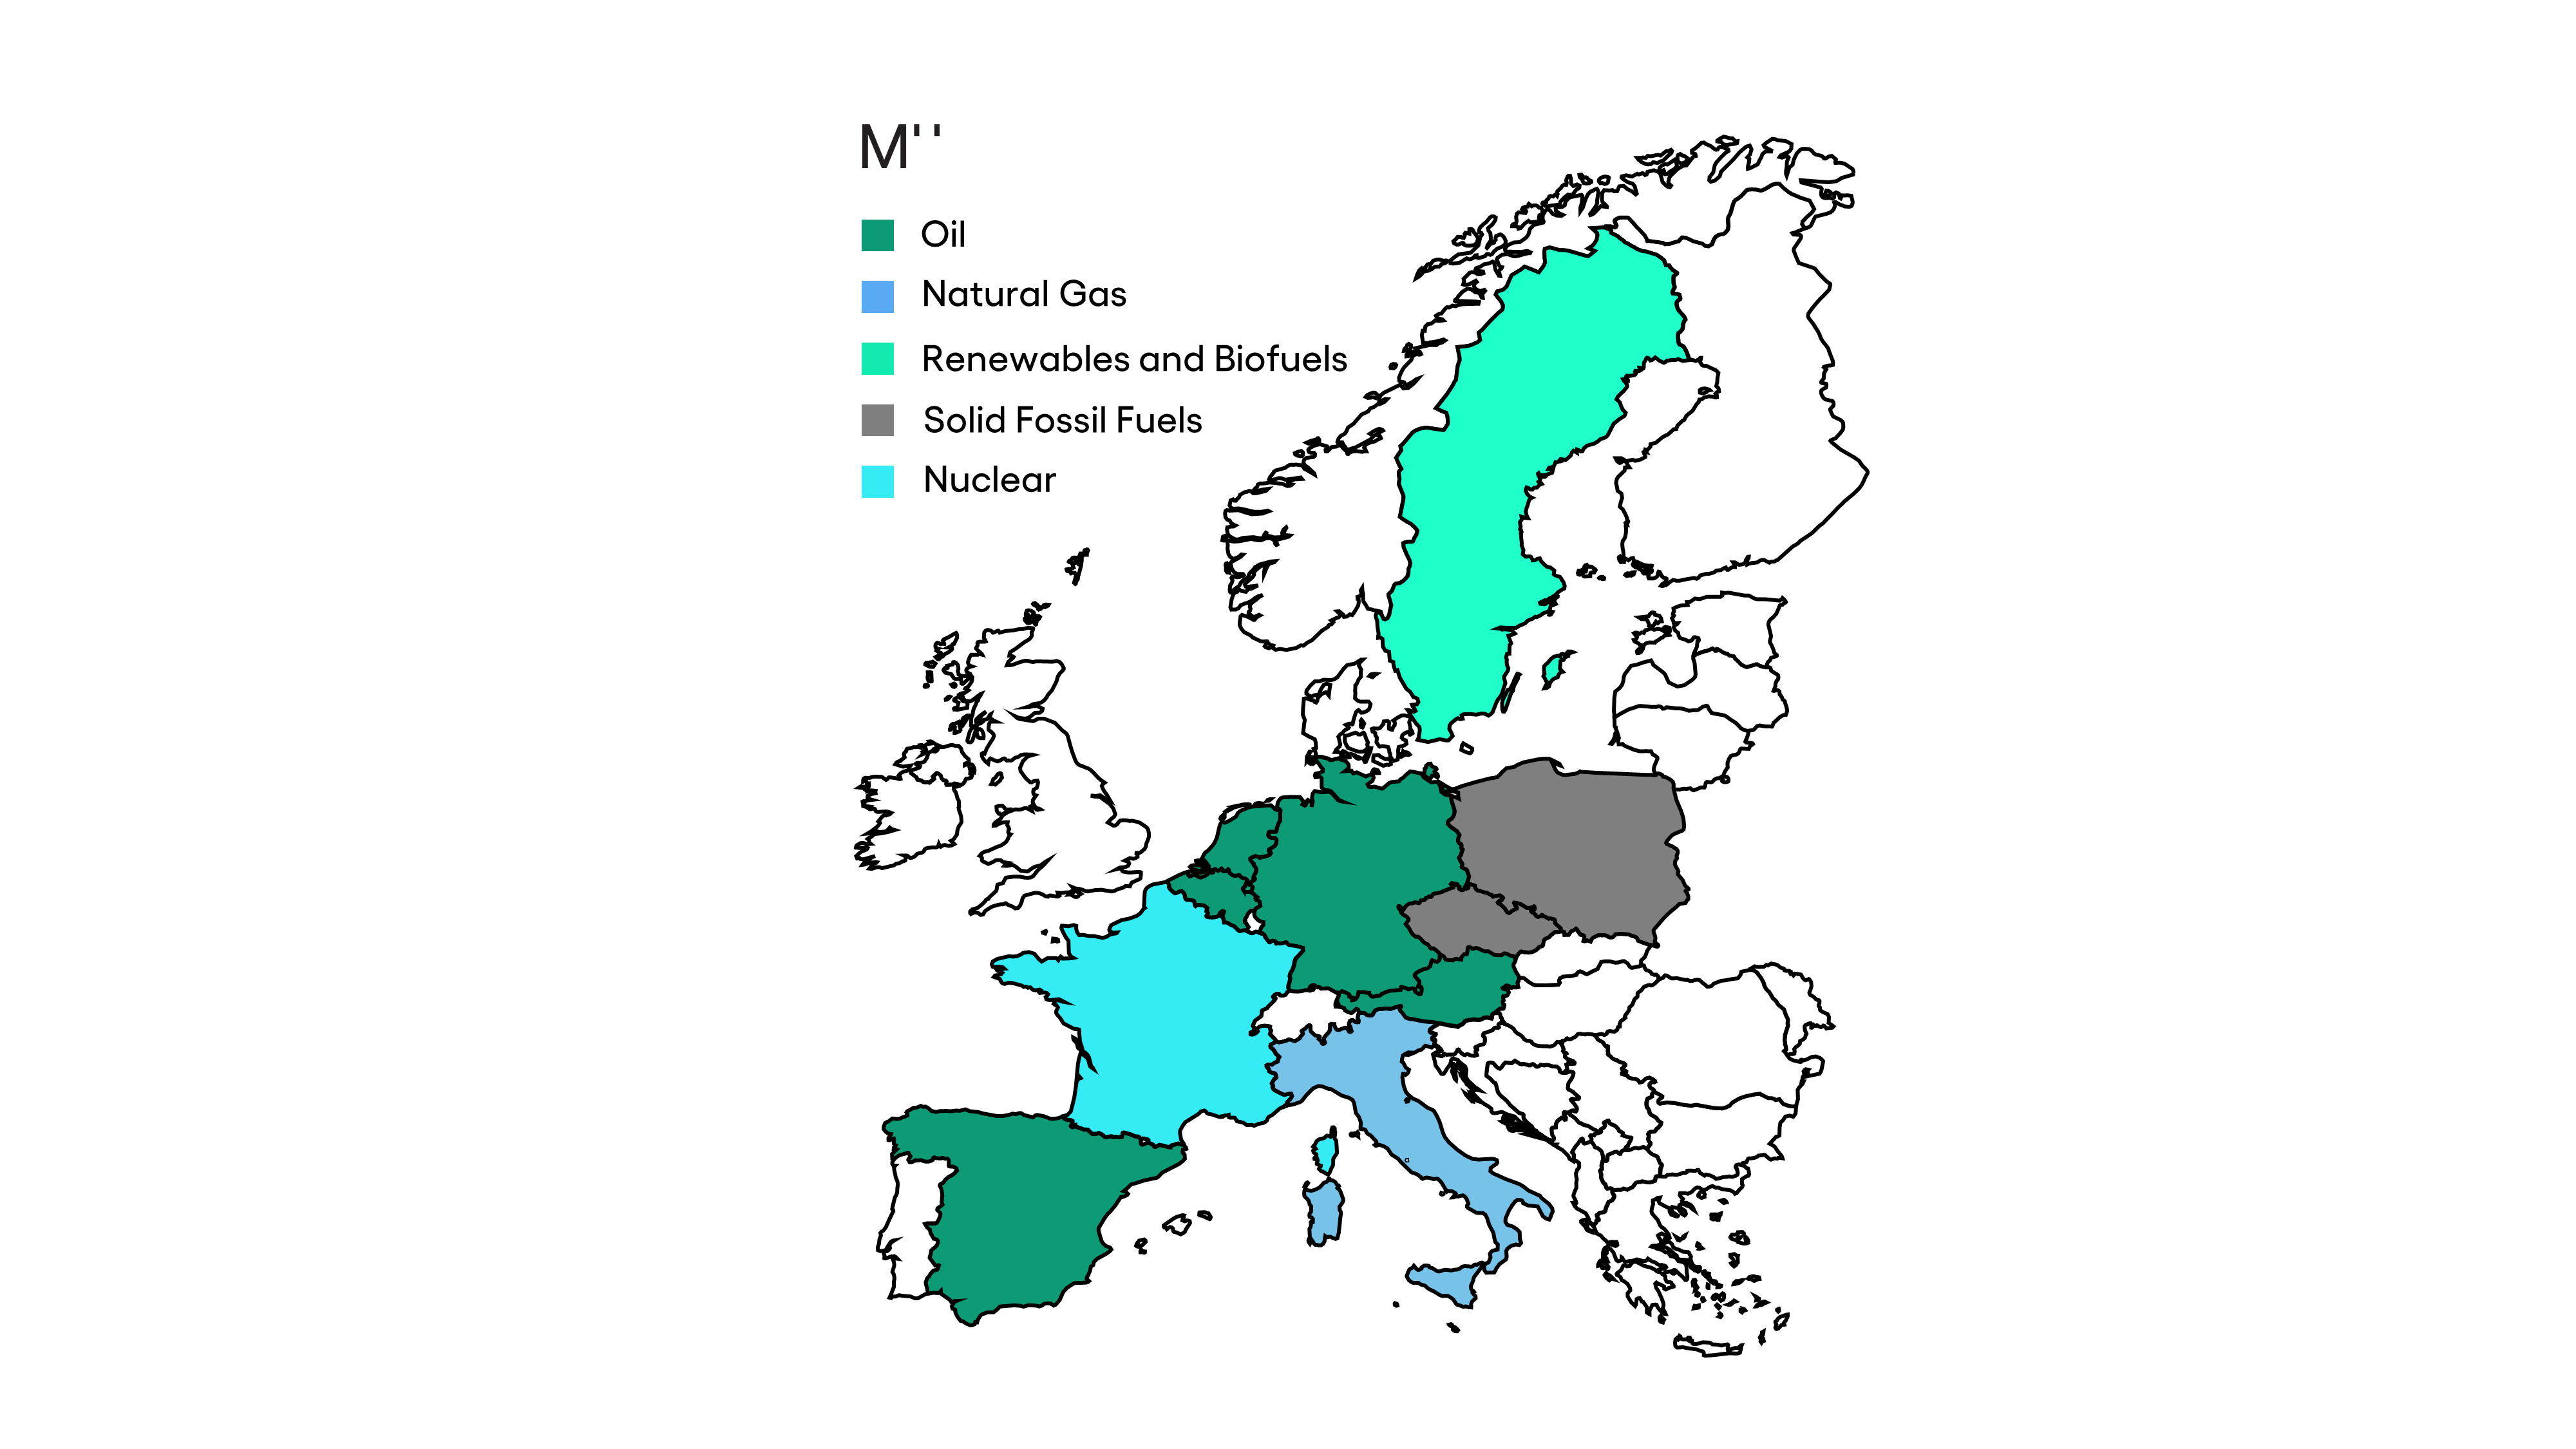 Main Primary Energy Source by European Country